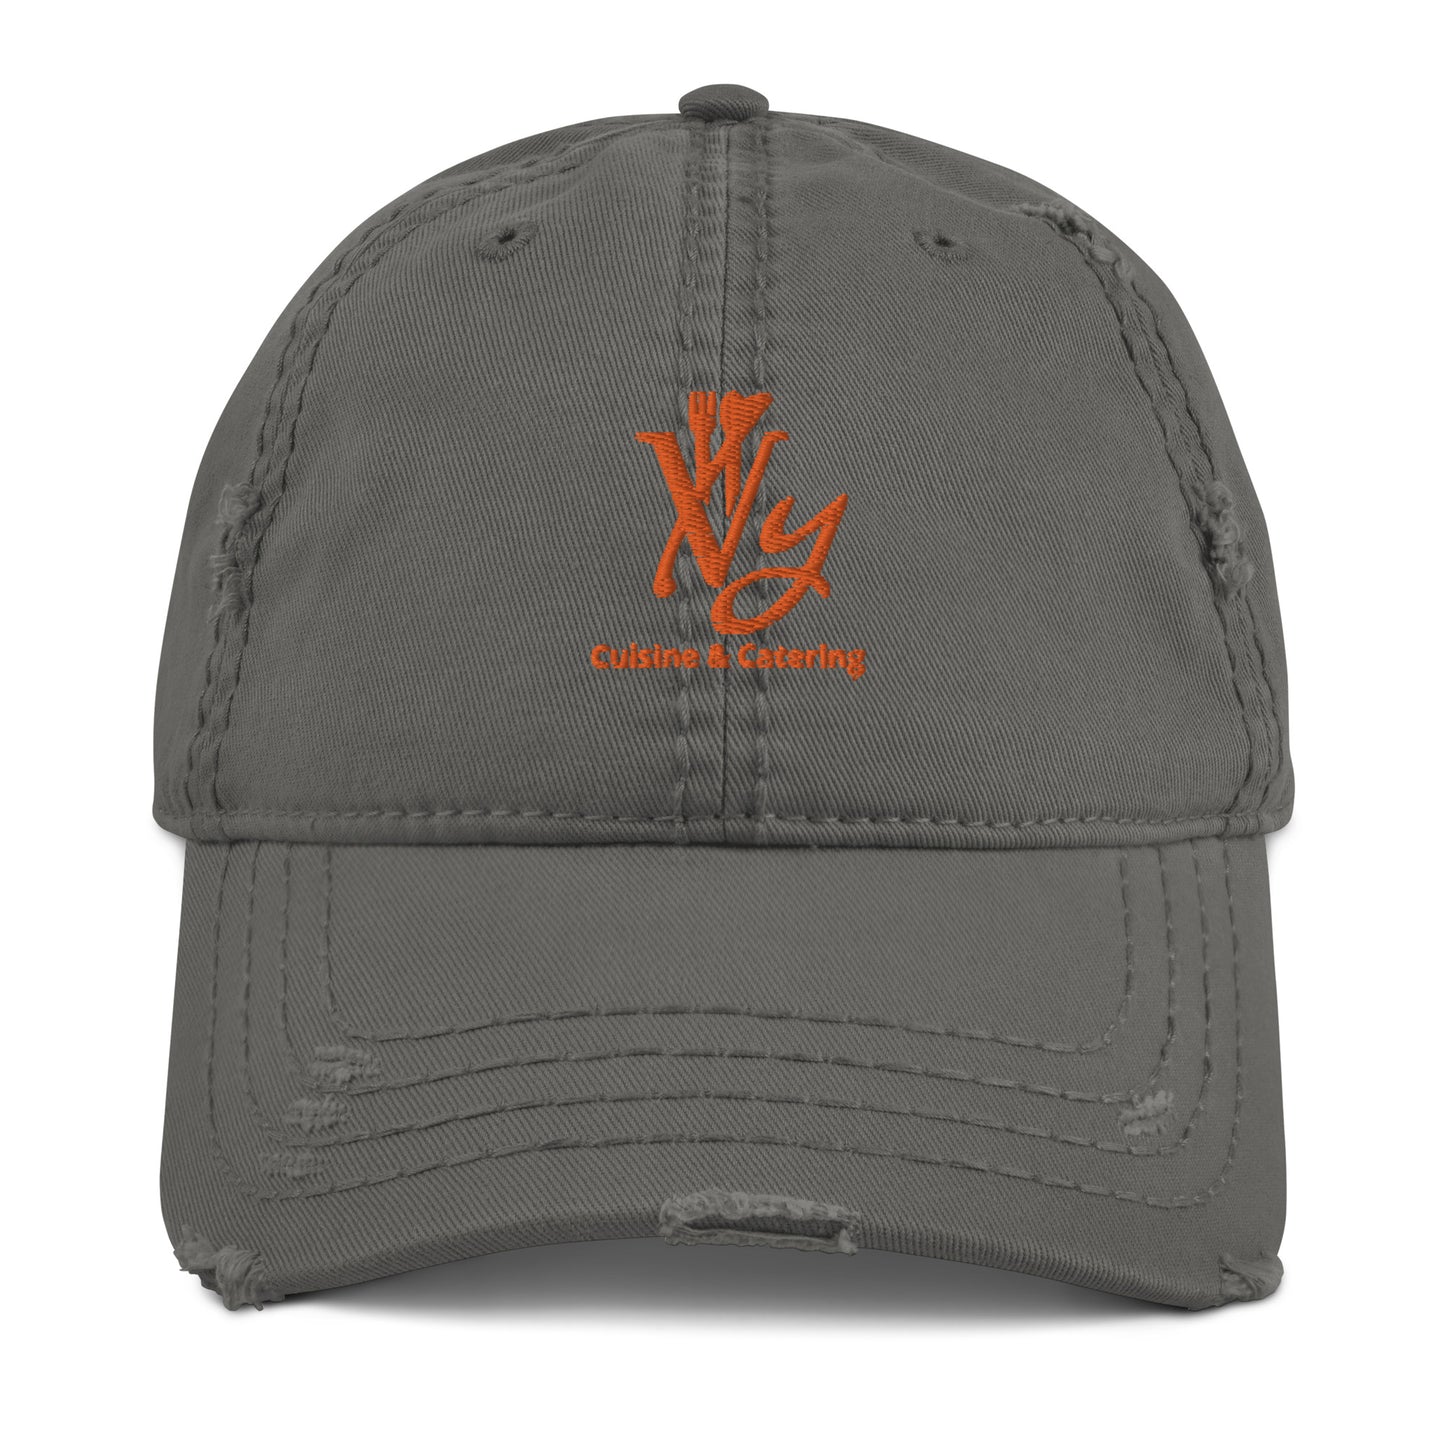 Ivy Cuisine & Catering Distressed Dad Hat